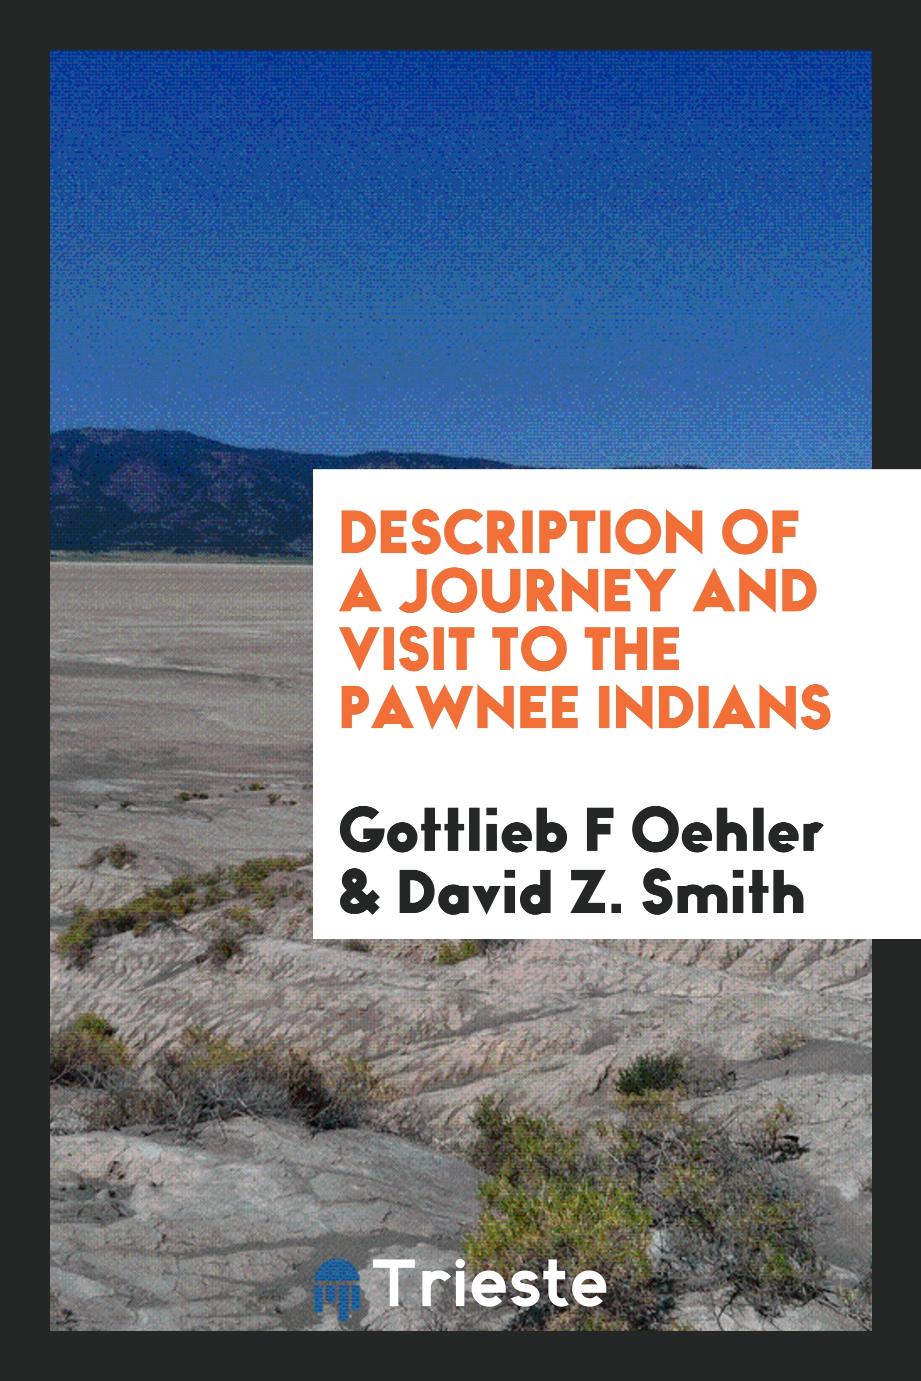 Description of a journey and visit to the Pawnee Indians